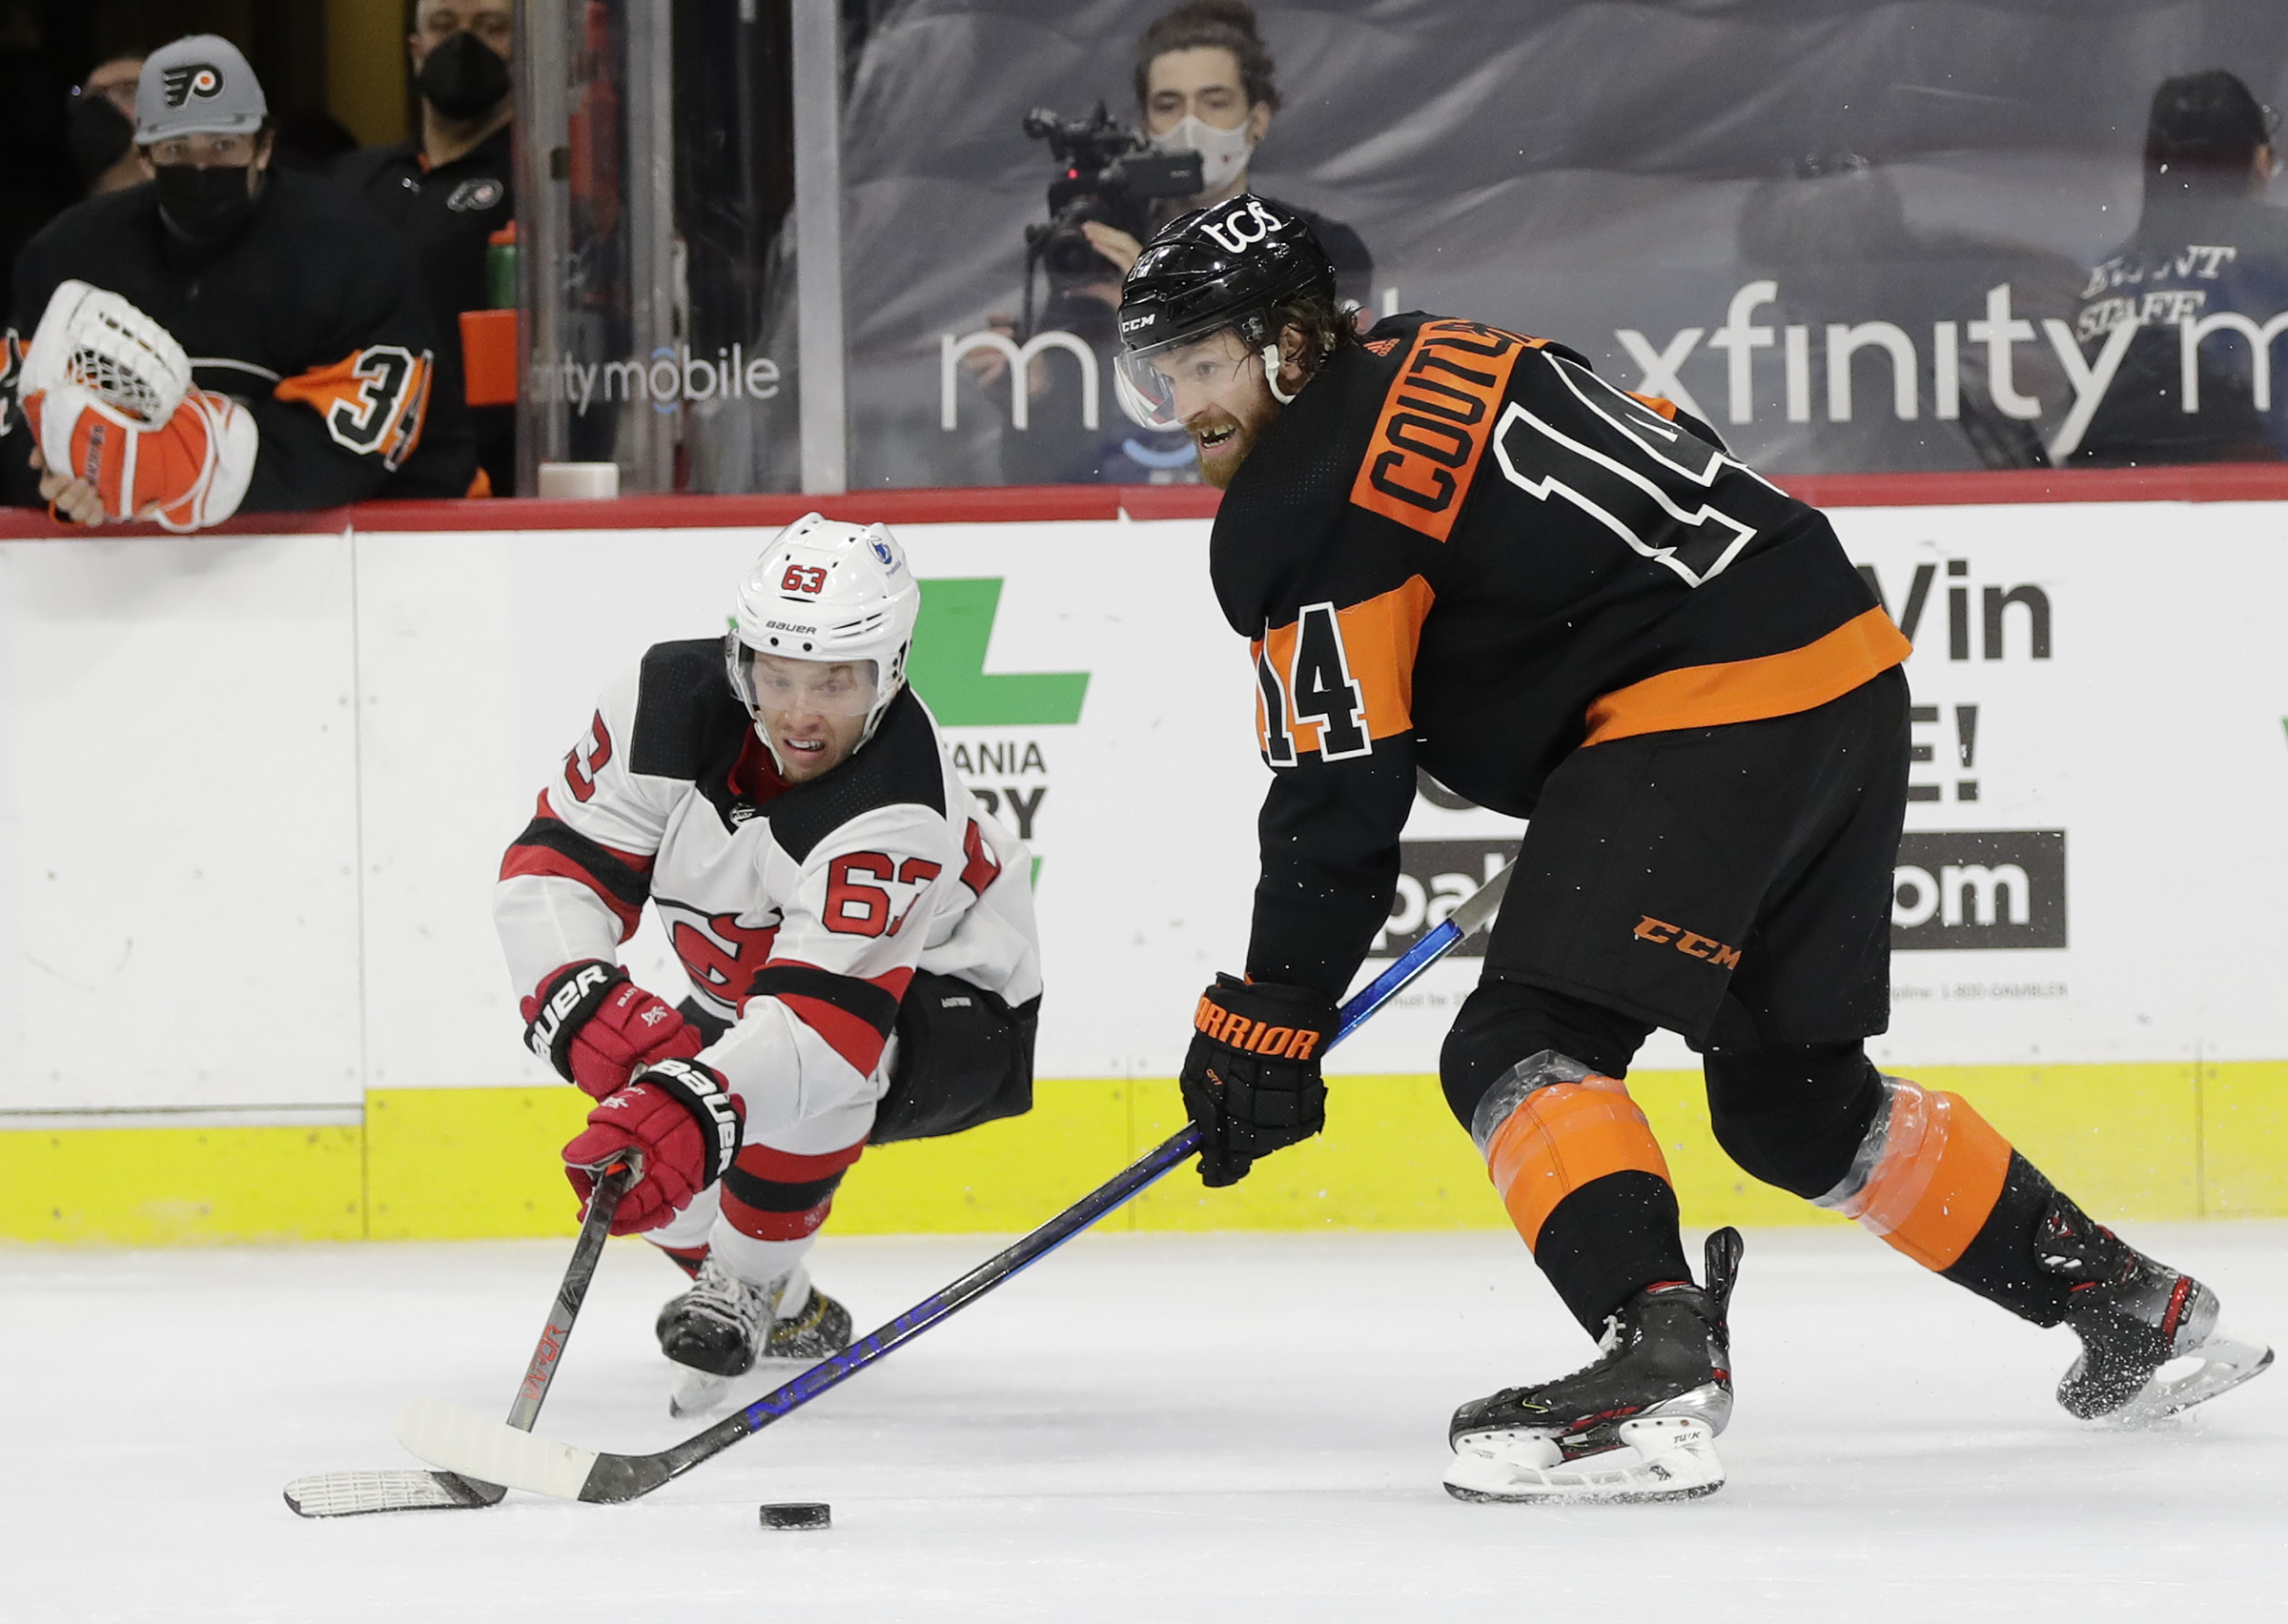 Sean Couturier, Claude Giroux, Nic Aube-Kubel spark Flyers to